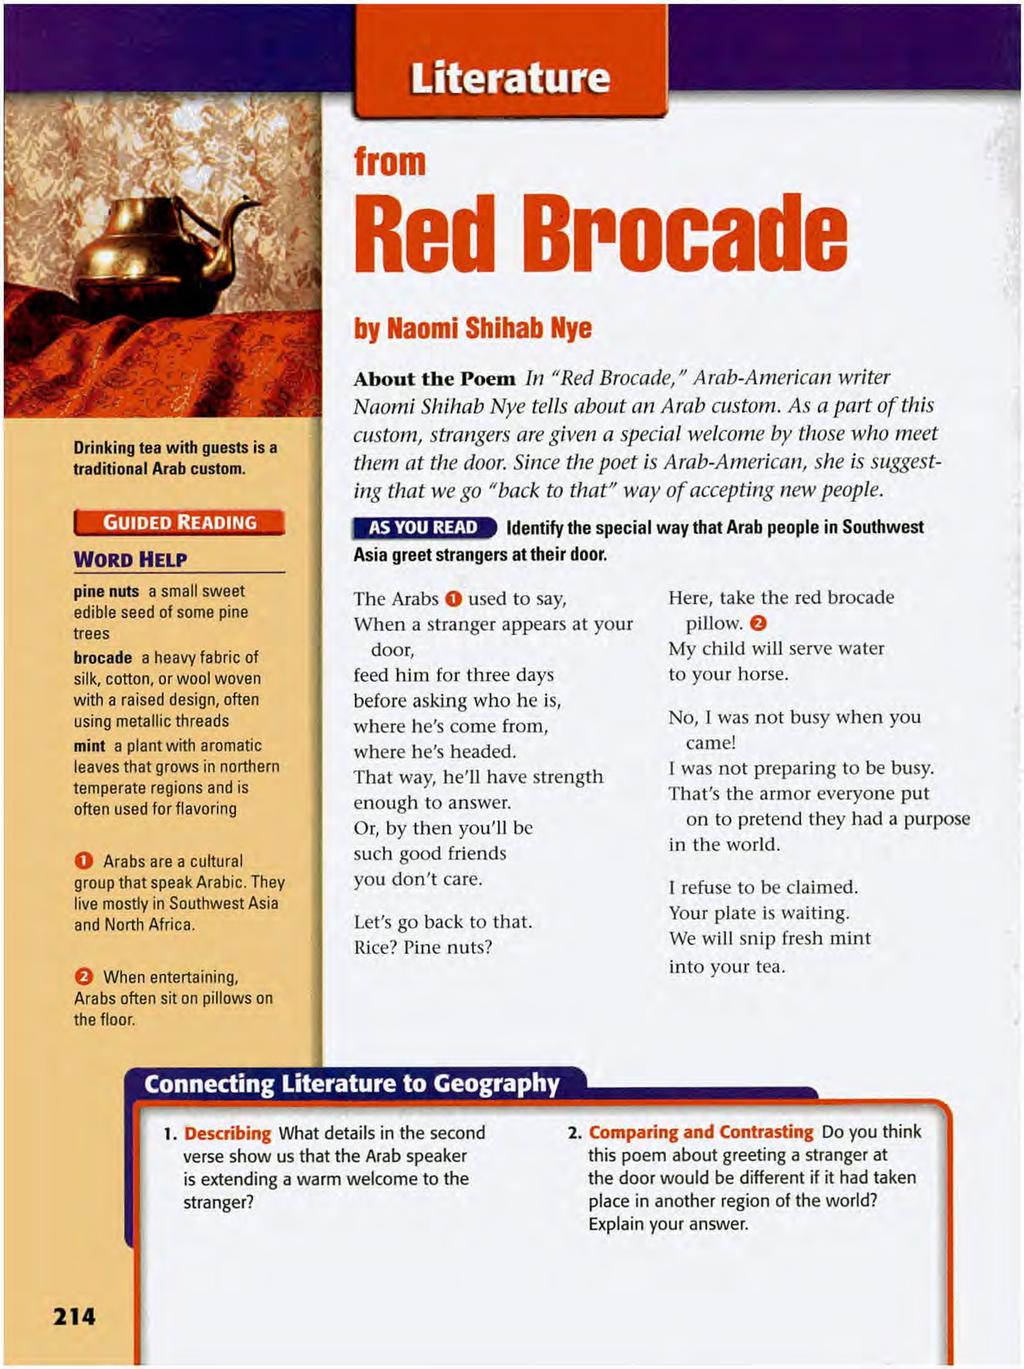 Red Brocade by Naomi Shihab Nye Drinking tea with guests is a traditional Arab custom.